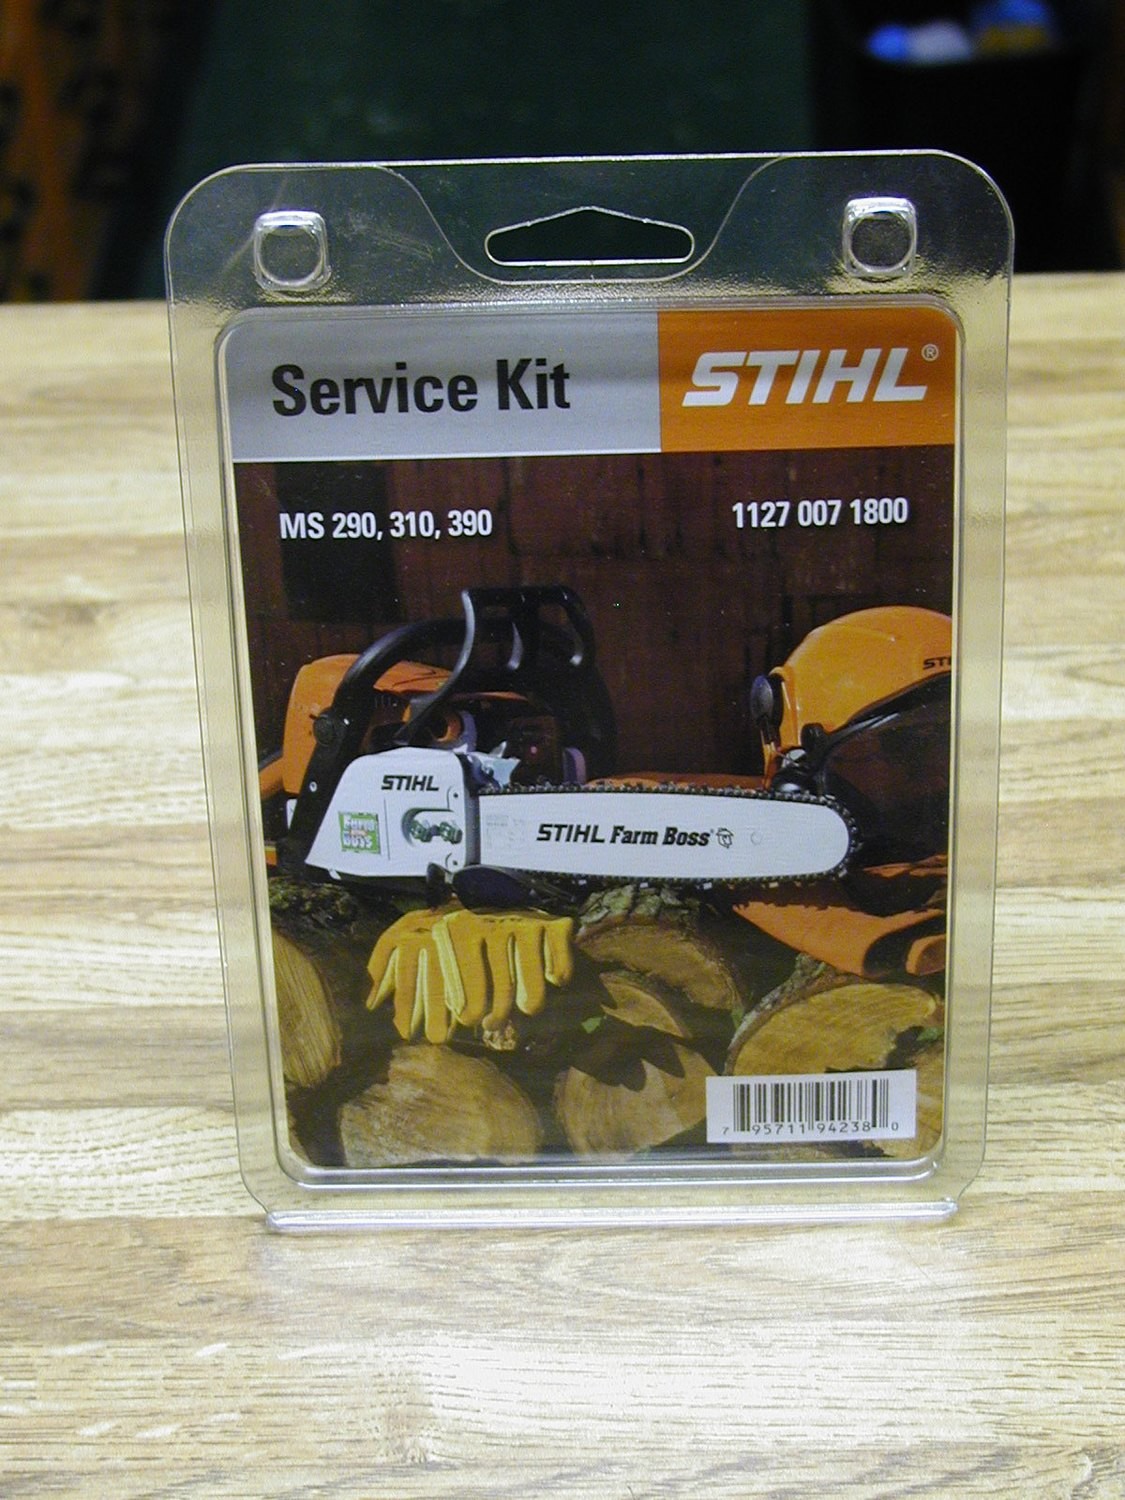 Details about   Genuine STIHL Service Kit 1130 007 1800 For MS 170 180 